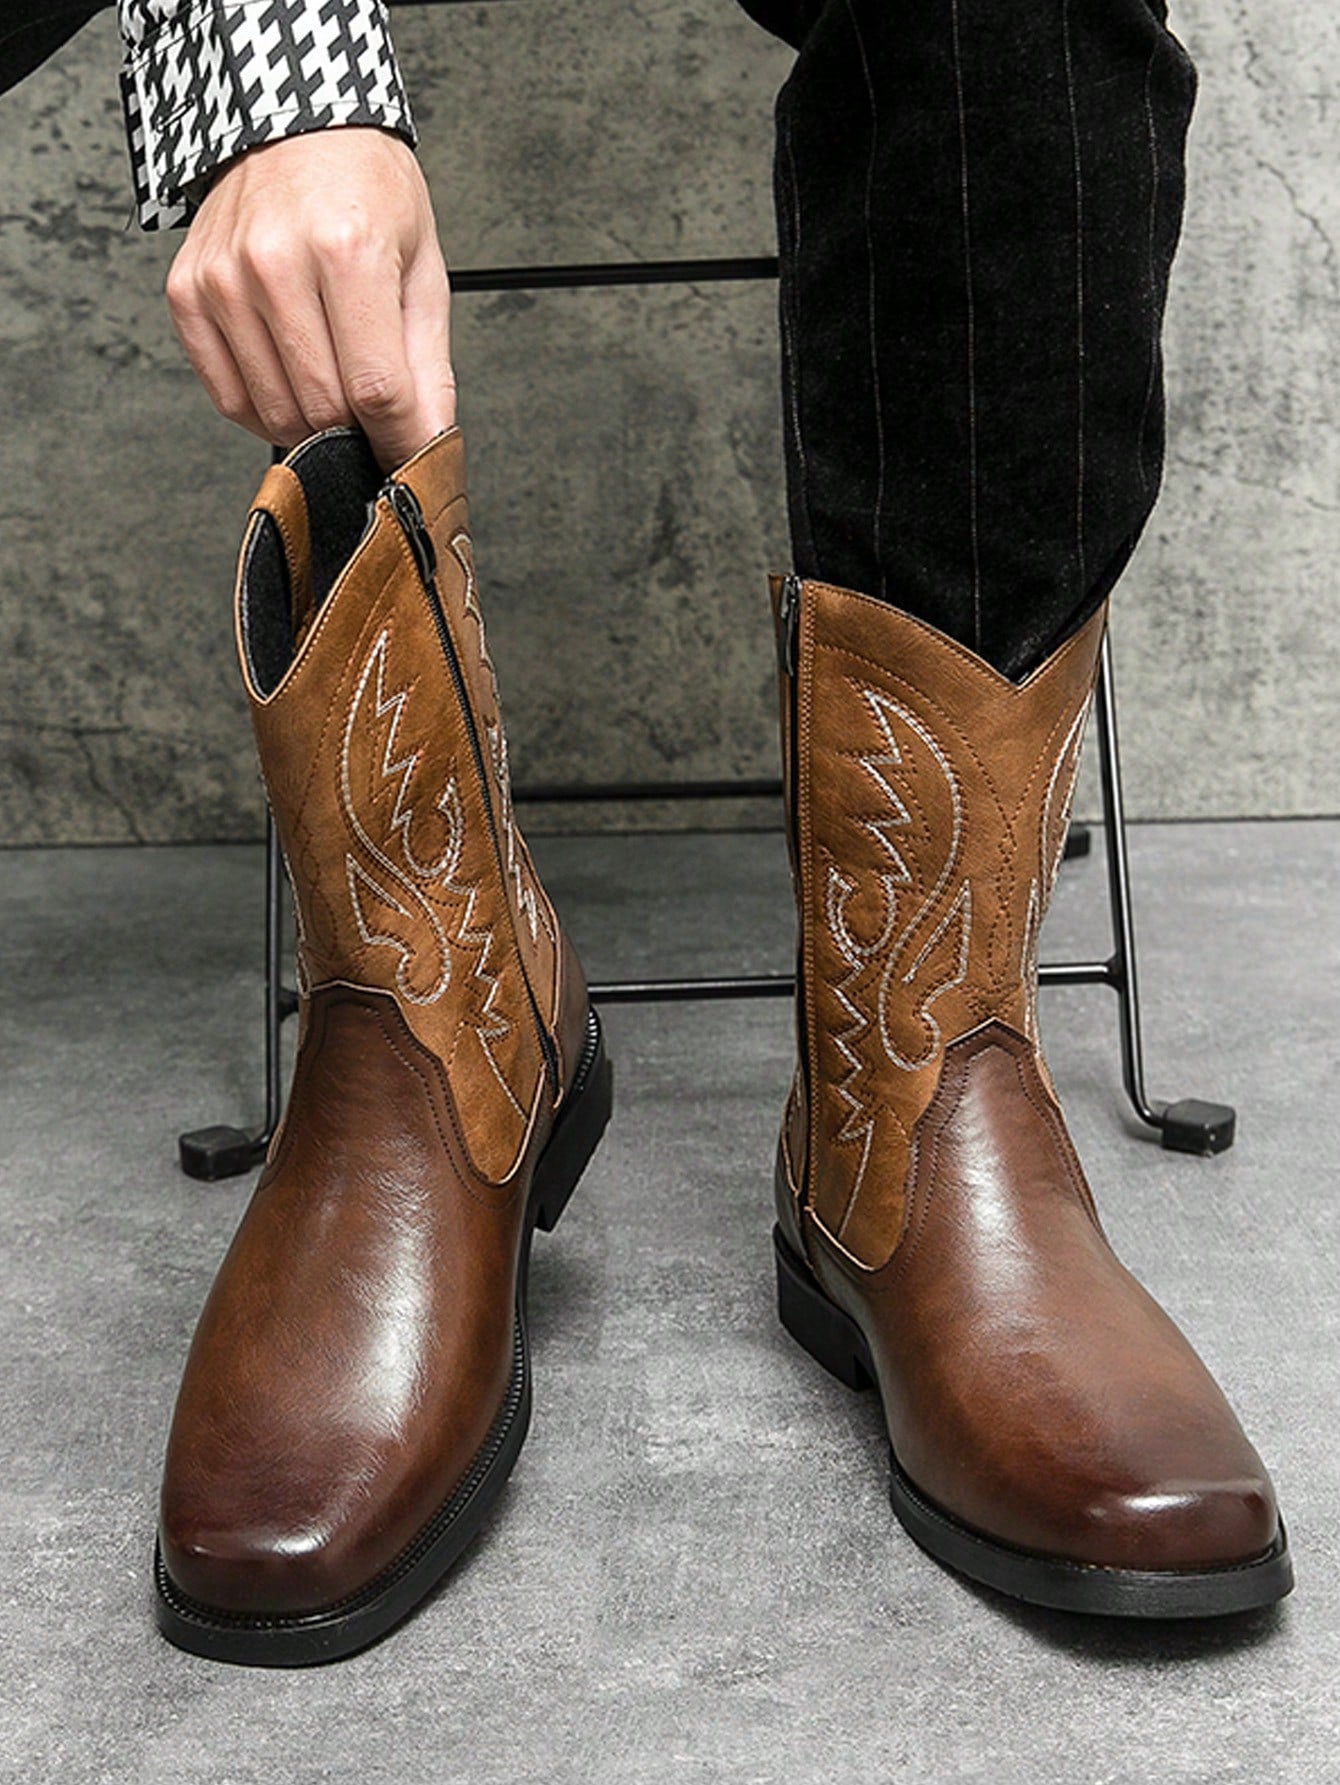 Men's Western Style Embroidered High Top Leather Cowboy Boots